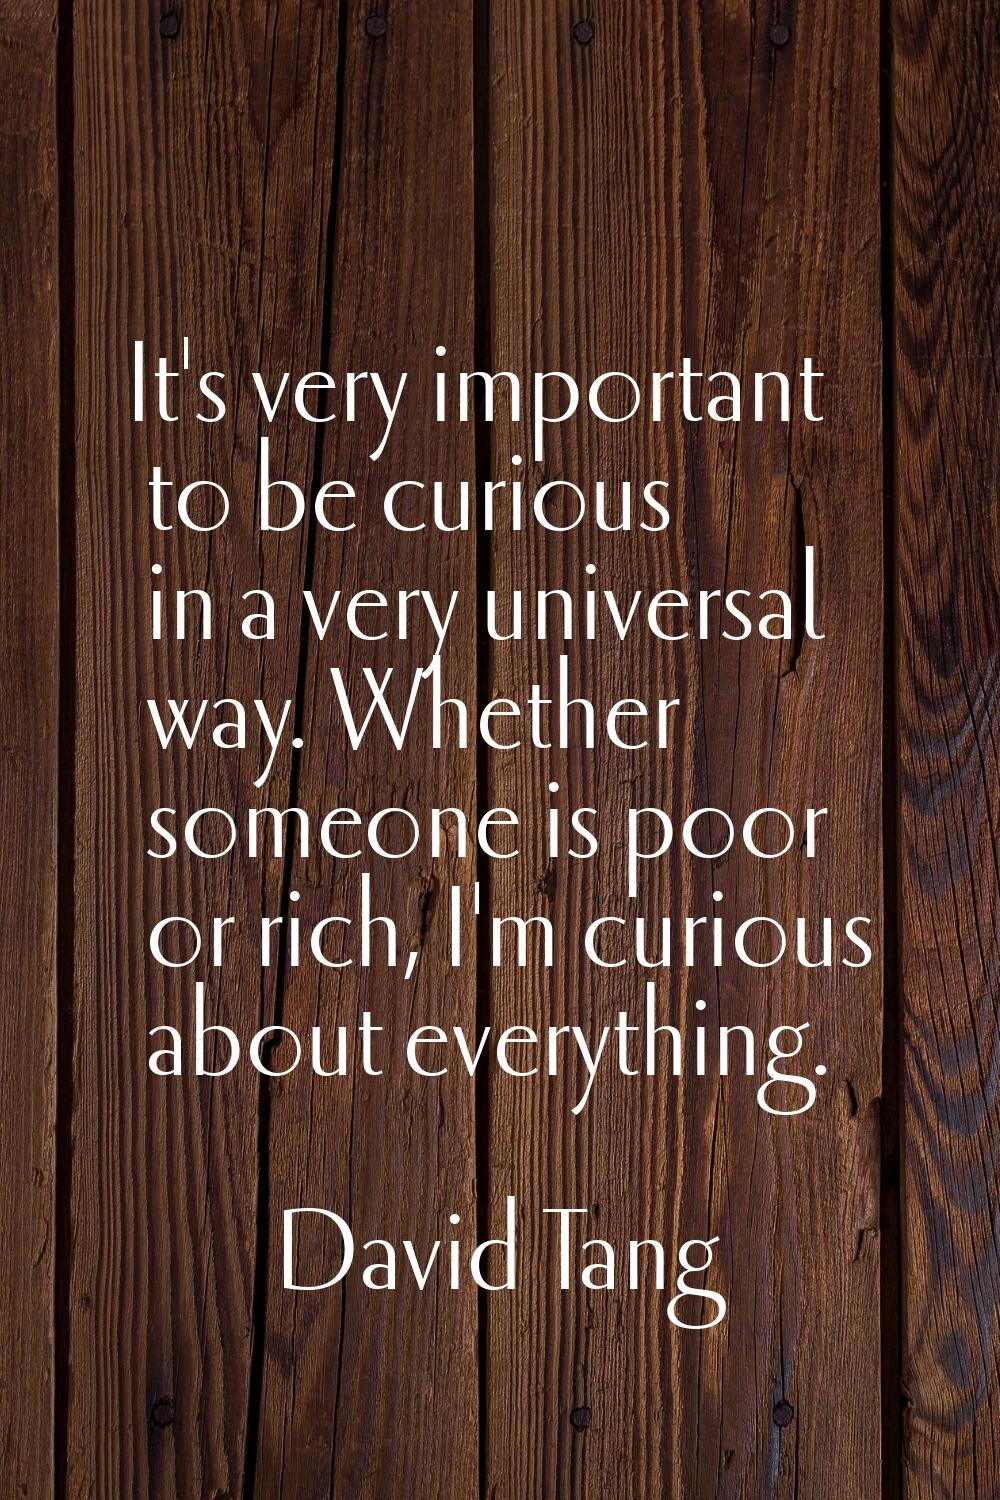 It's very important to be curious in a very universal way. Whether someone is poor or rich, I'm cur